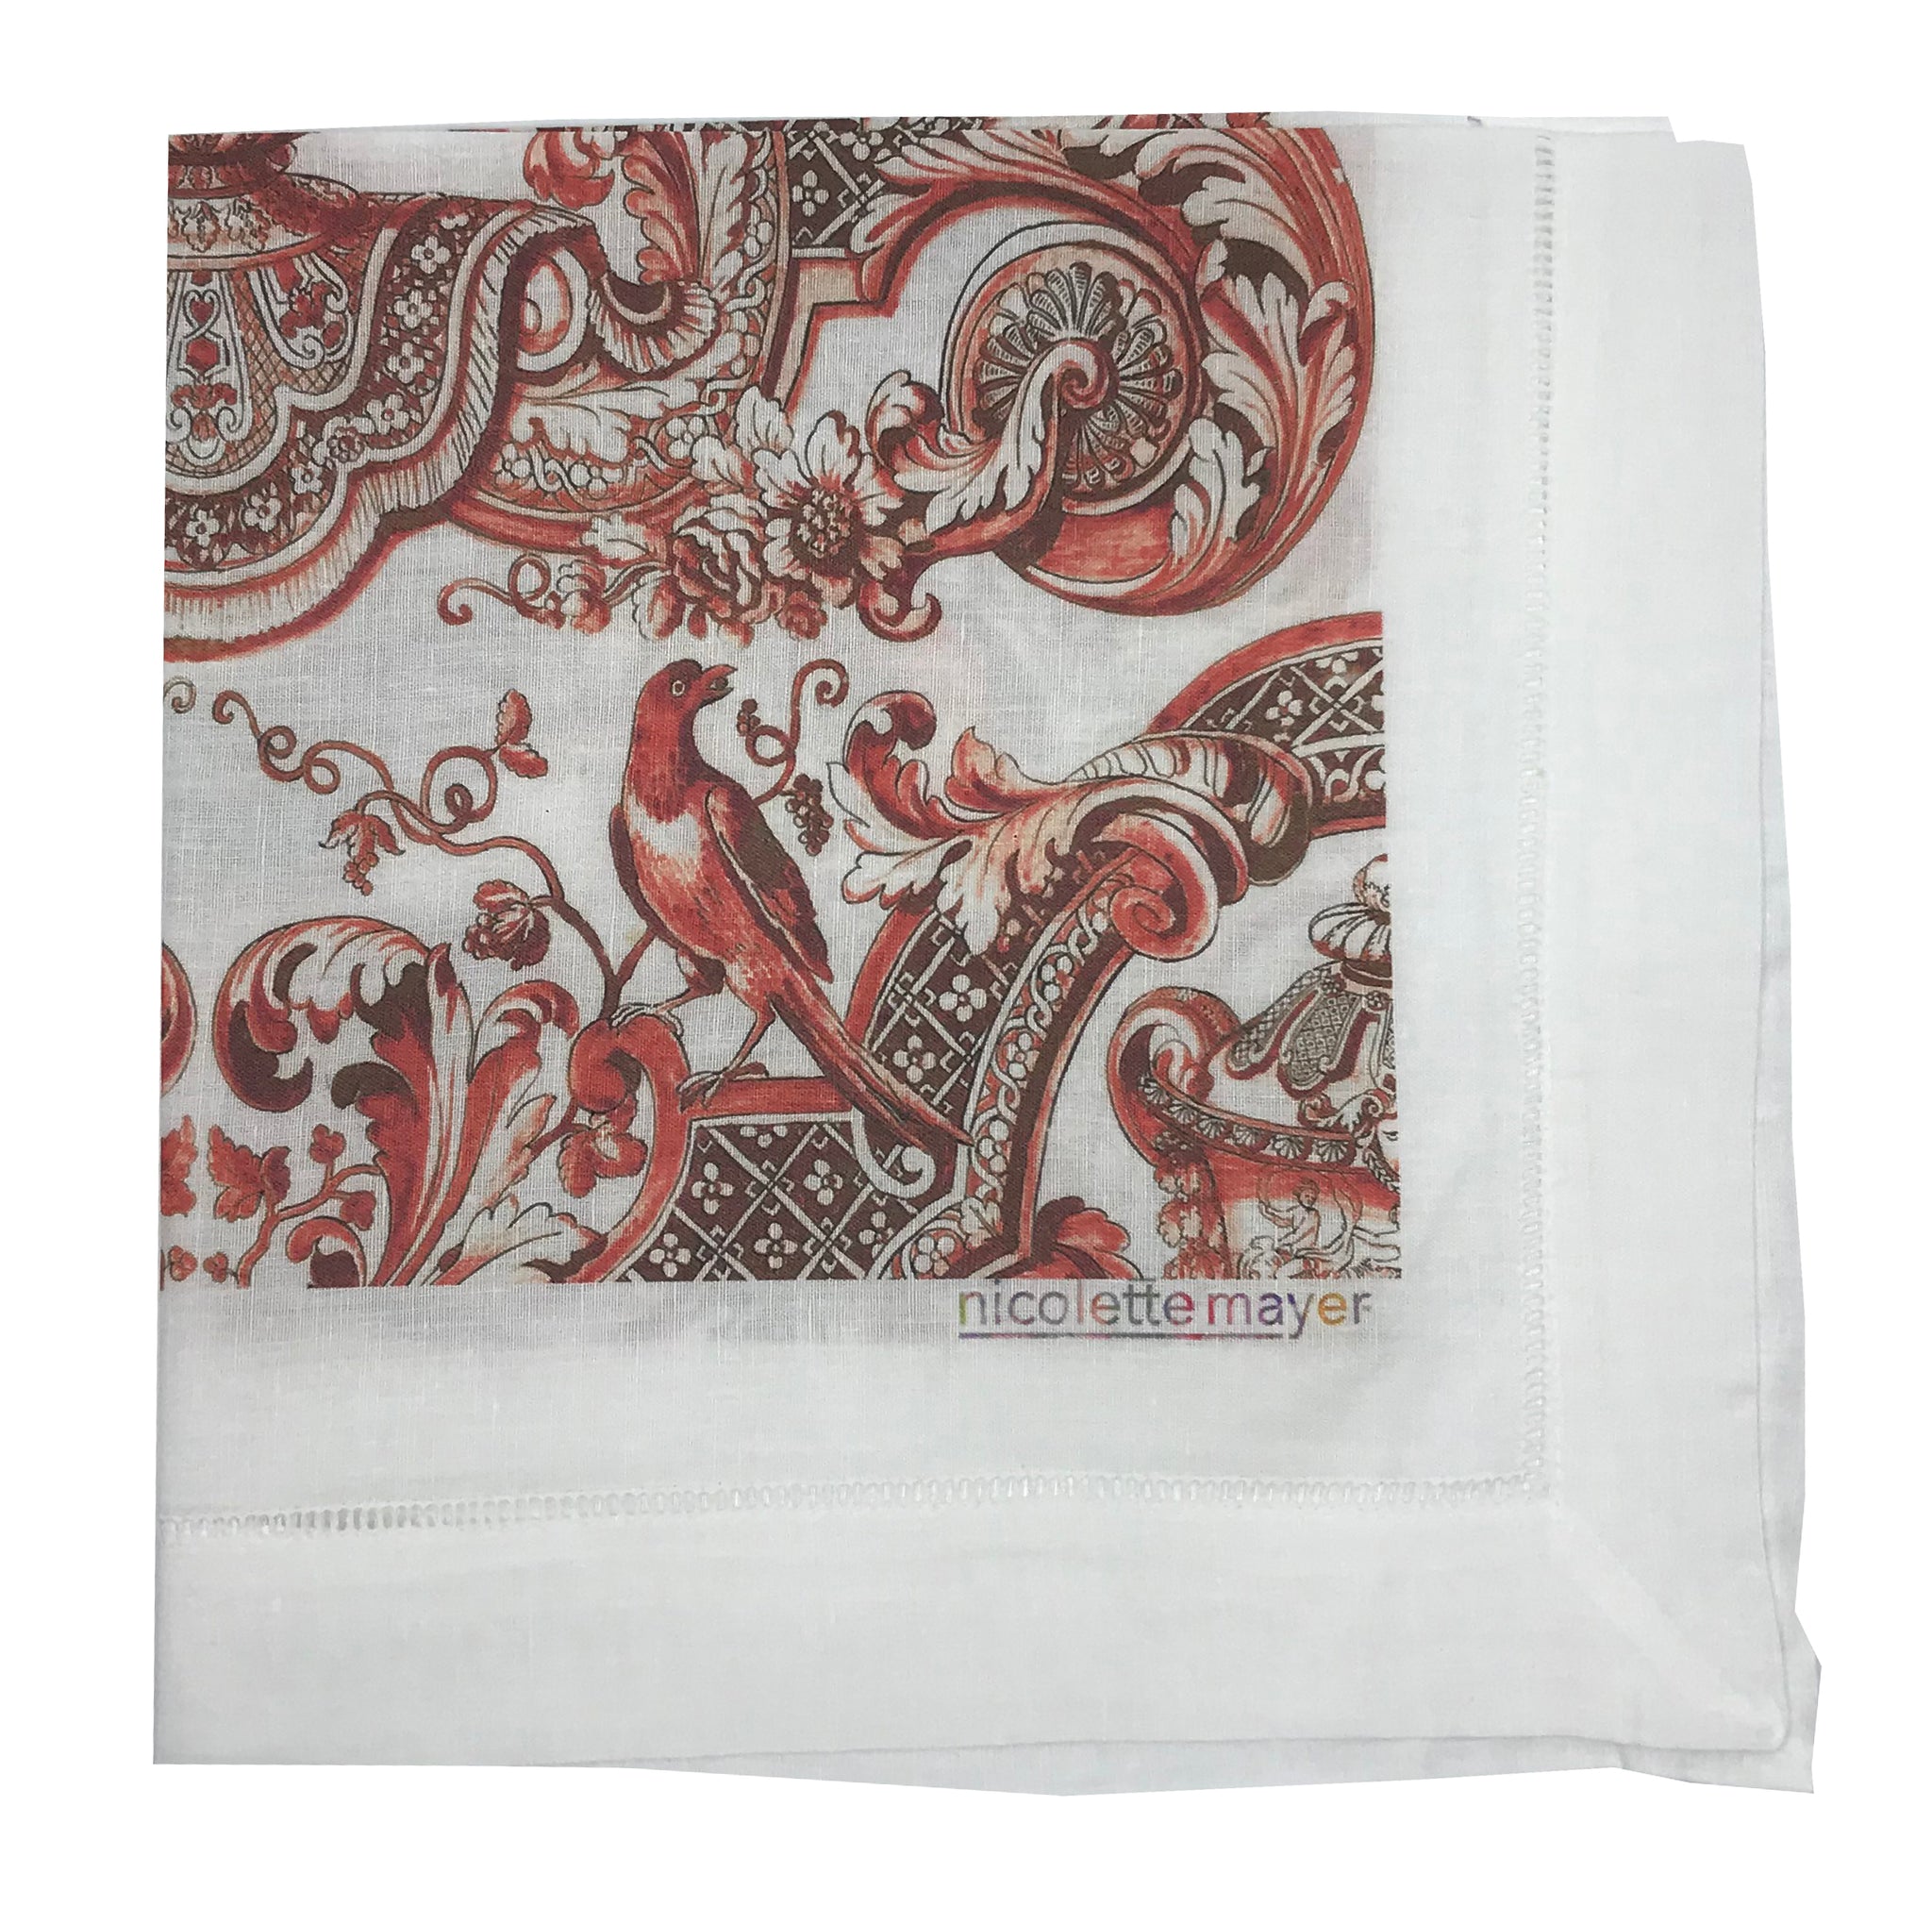 ROYAL DELFT WILLIAM AND MARY RED 22X22" HEMSTITCH DINNER NAPKIN, SET OF 4 - nicolettemayer.com